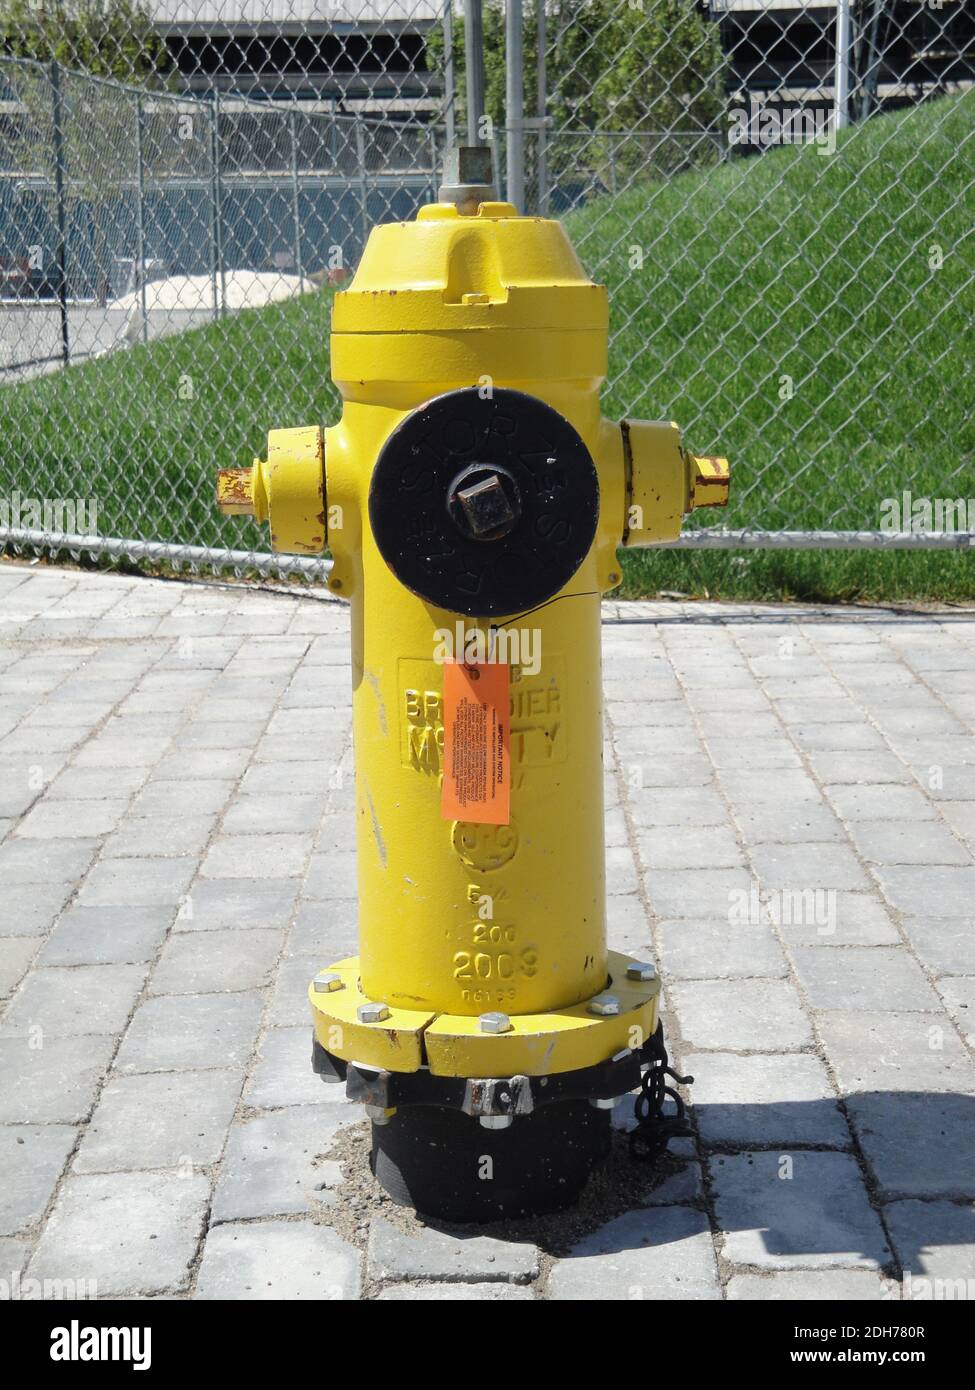 A fire hydrant in Toronto, Canada with a maintenance tag Stock Photo